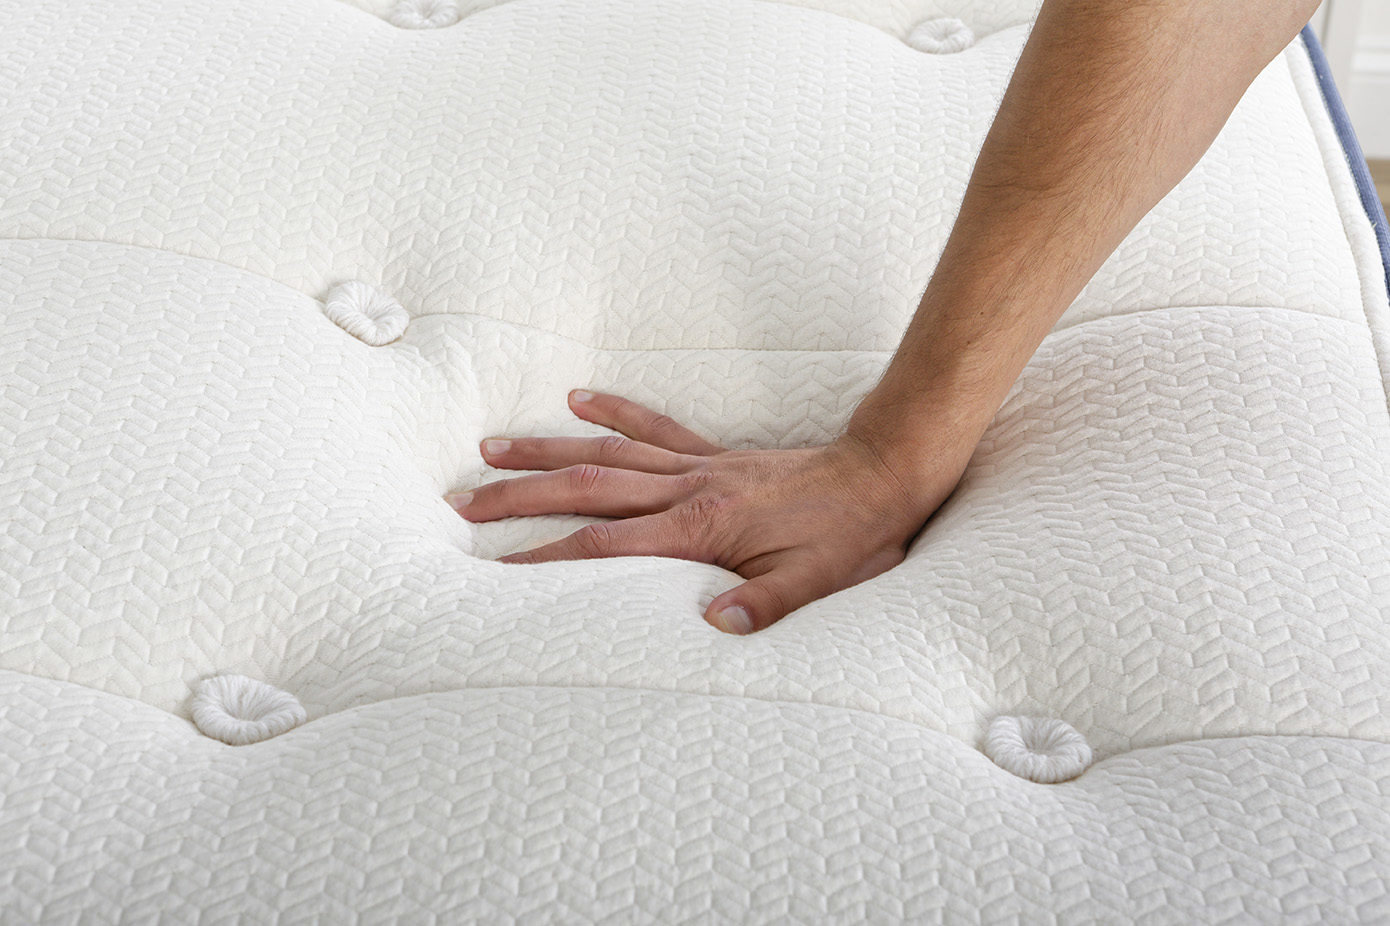 A hand presses down on a white, tufted organic mattress, showcasing its cushioning and softness.